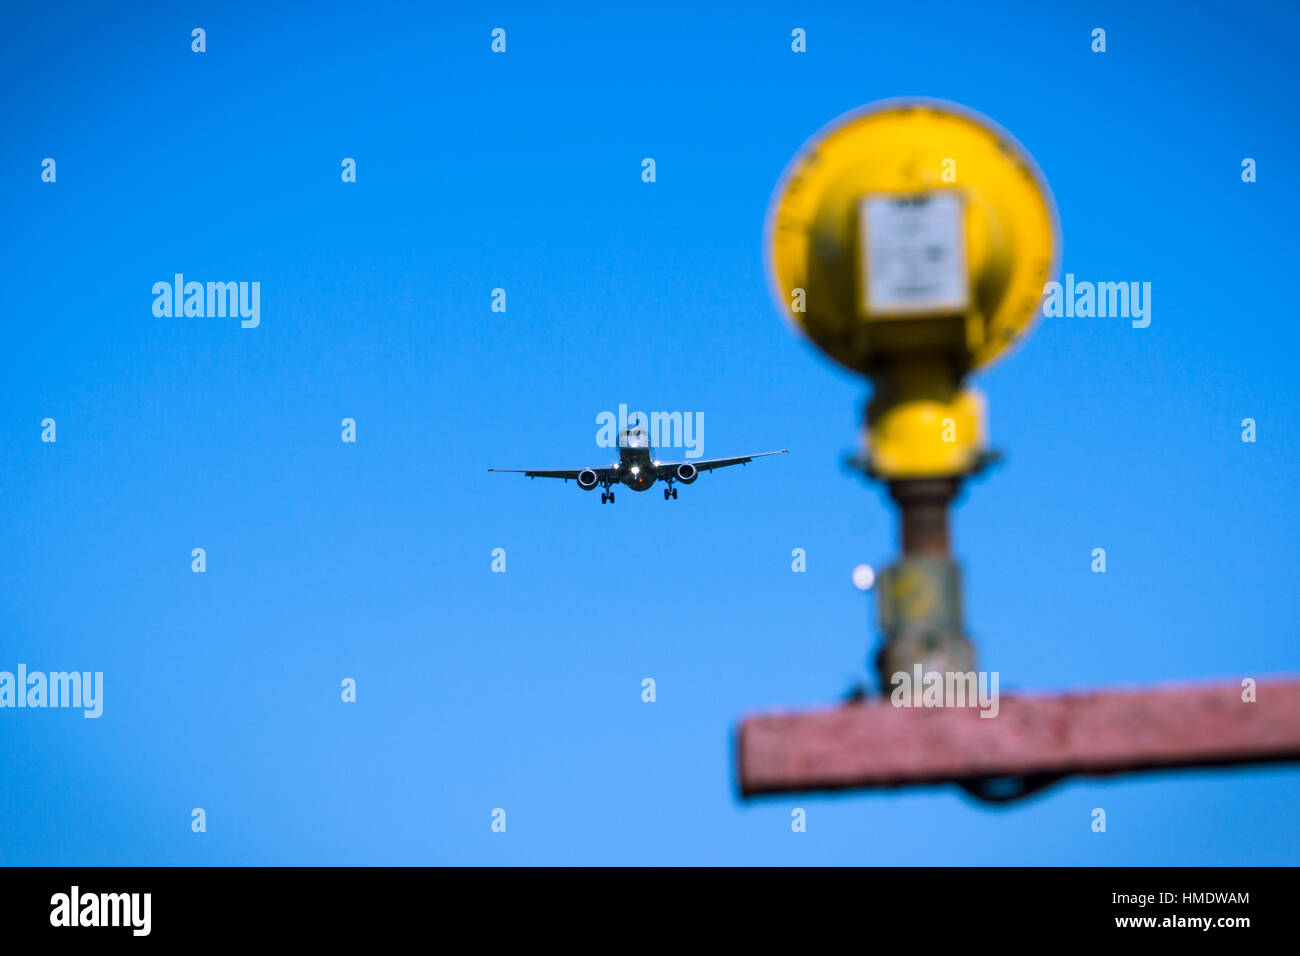 Jet airplane flying overhead close-up on a blue sky background Stock Photo